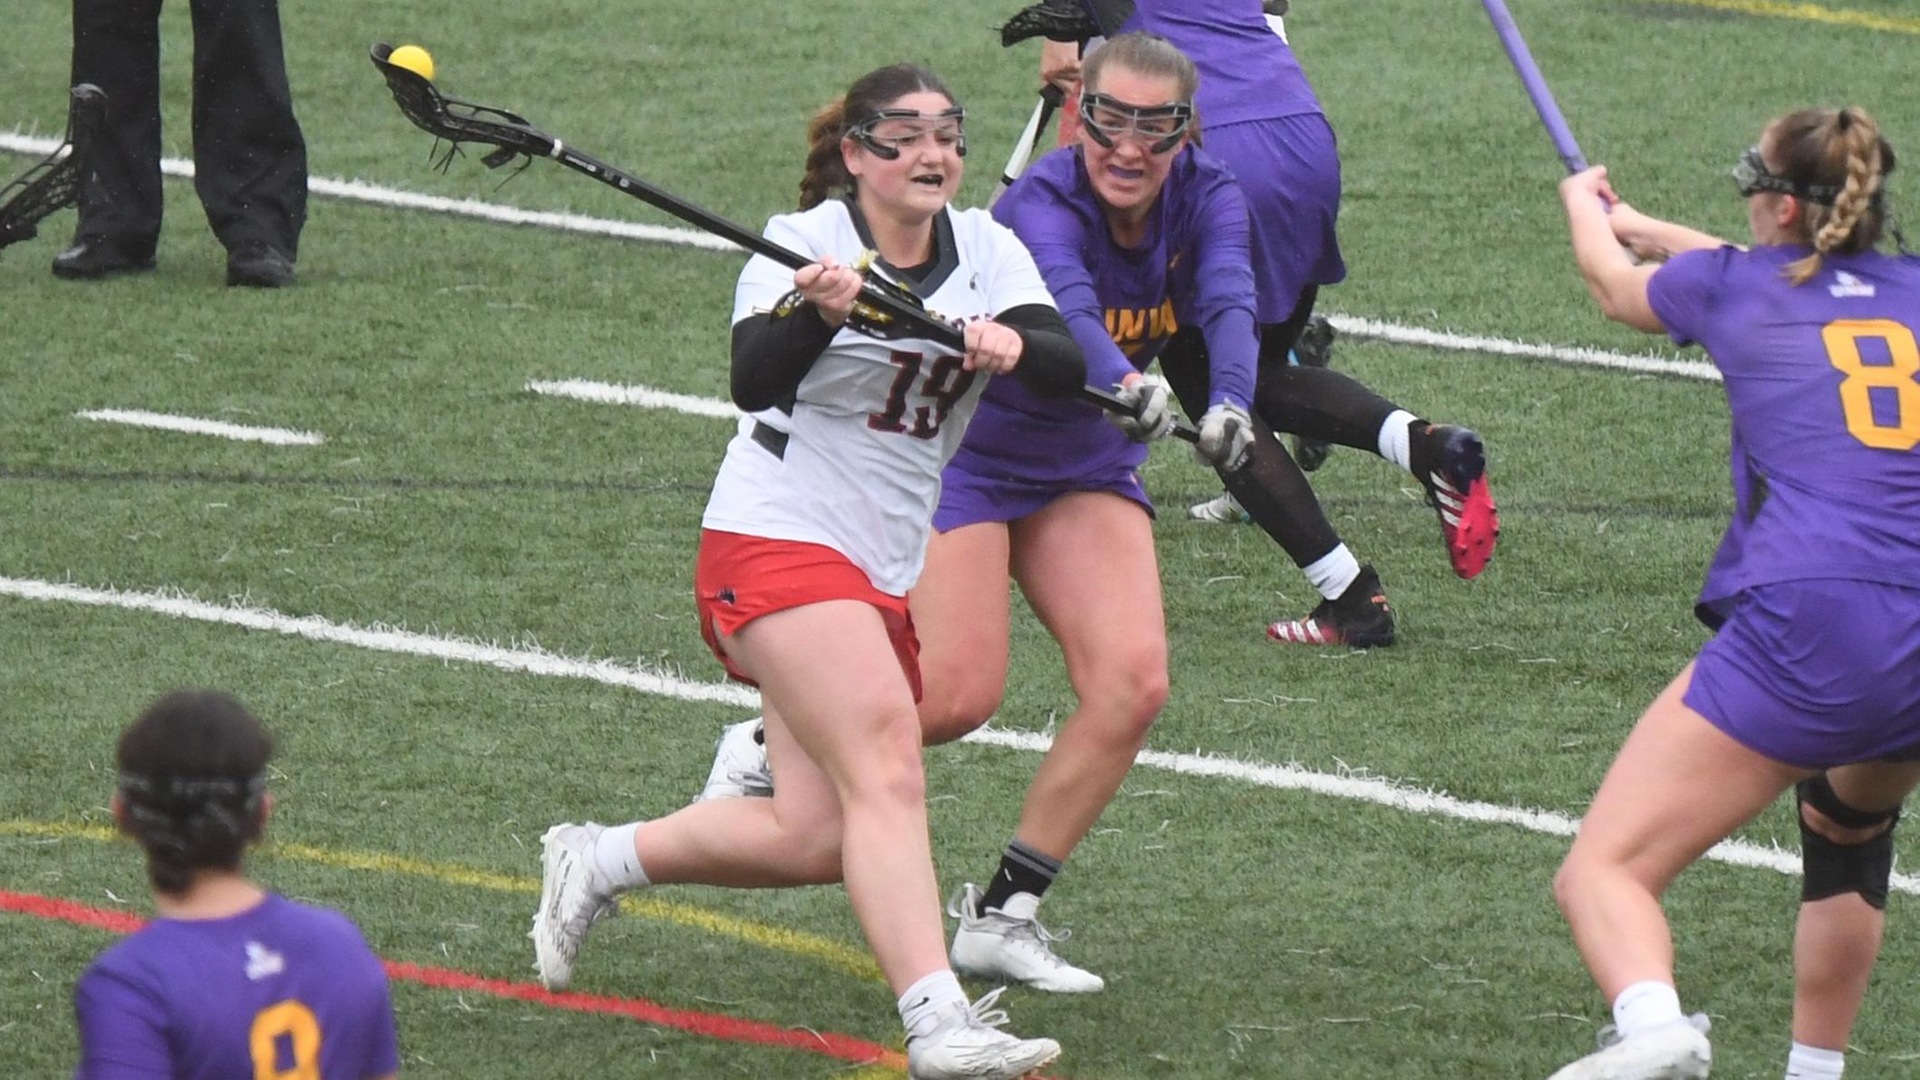 Victory over Northwestern-St. Paul Earns Foresters Home Field Advantage in MWLC Tourney Semifinals